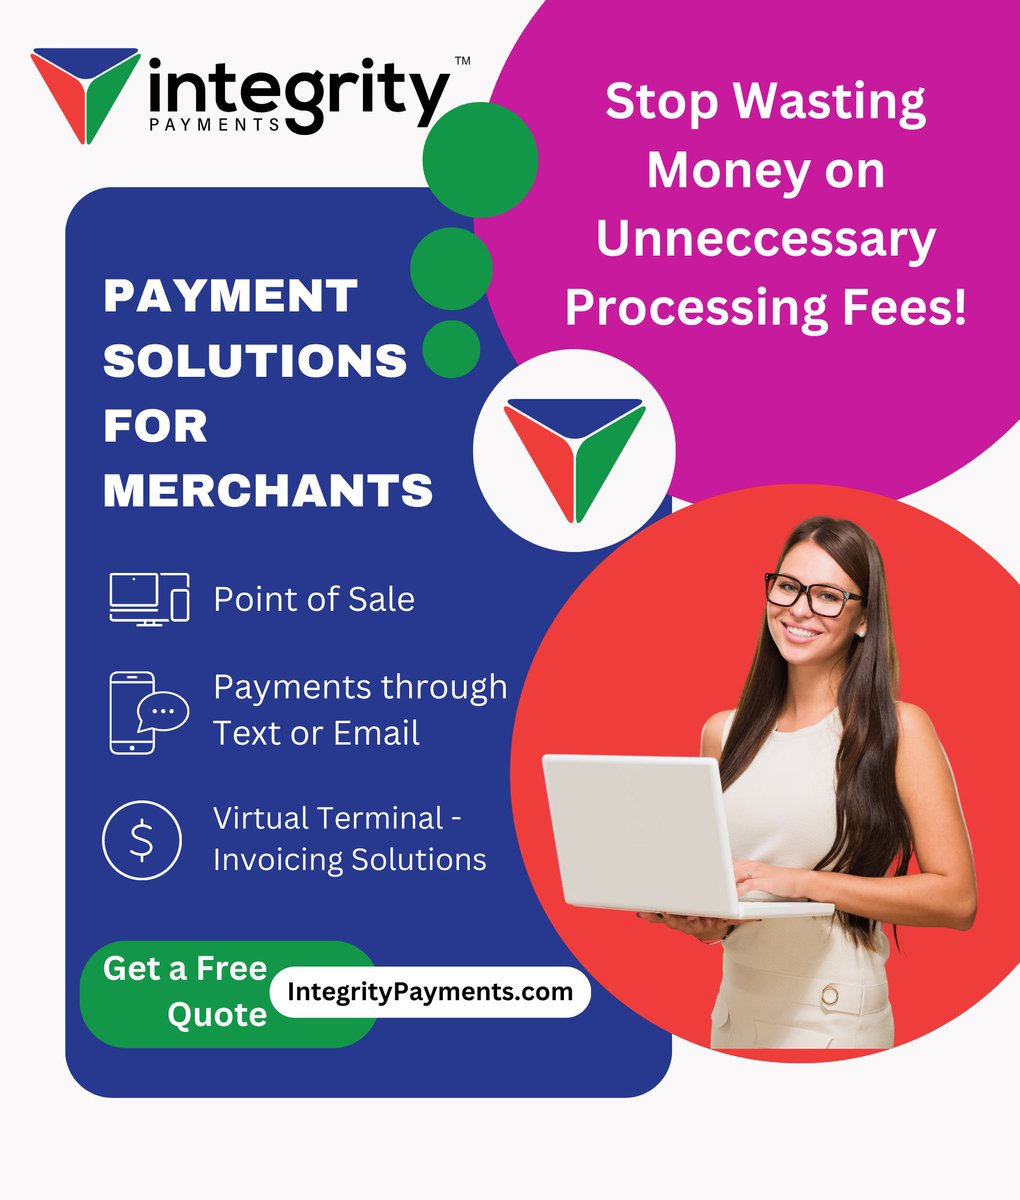 What does your #business need today?

Integrity Payments 
integritypayments.com
Info@integritypayments.com
877-639-1000

#Integritypayments #paymentprocessing #paymentsolutions #payments #pointofsale #invoicing #invoicingsoftware #payroll #smallbusiness #smallbiz